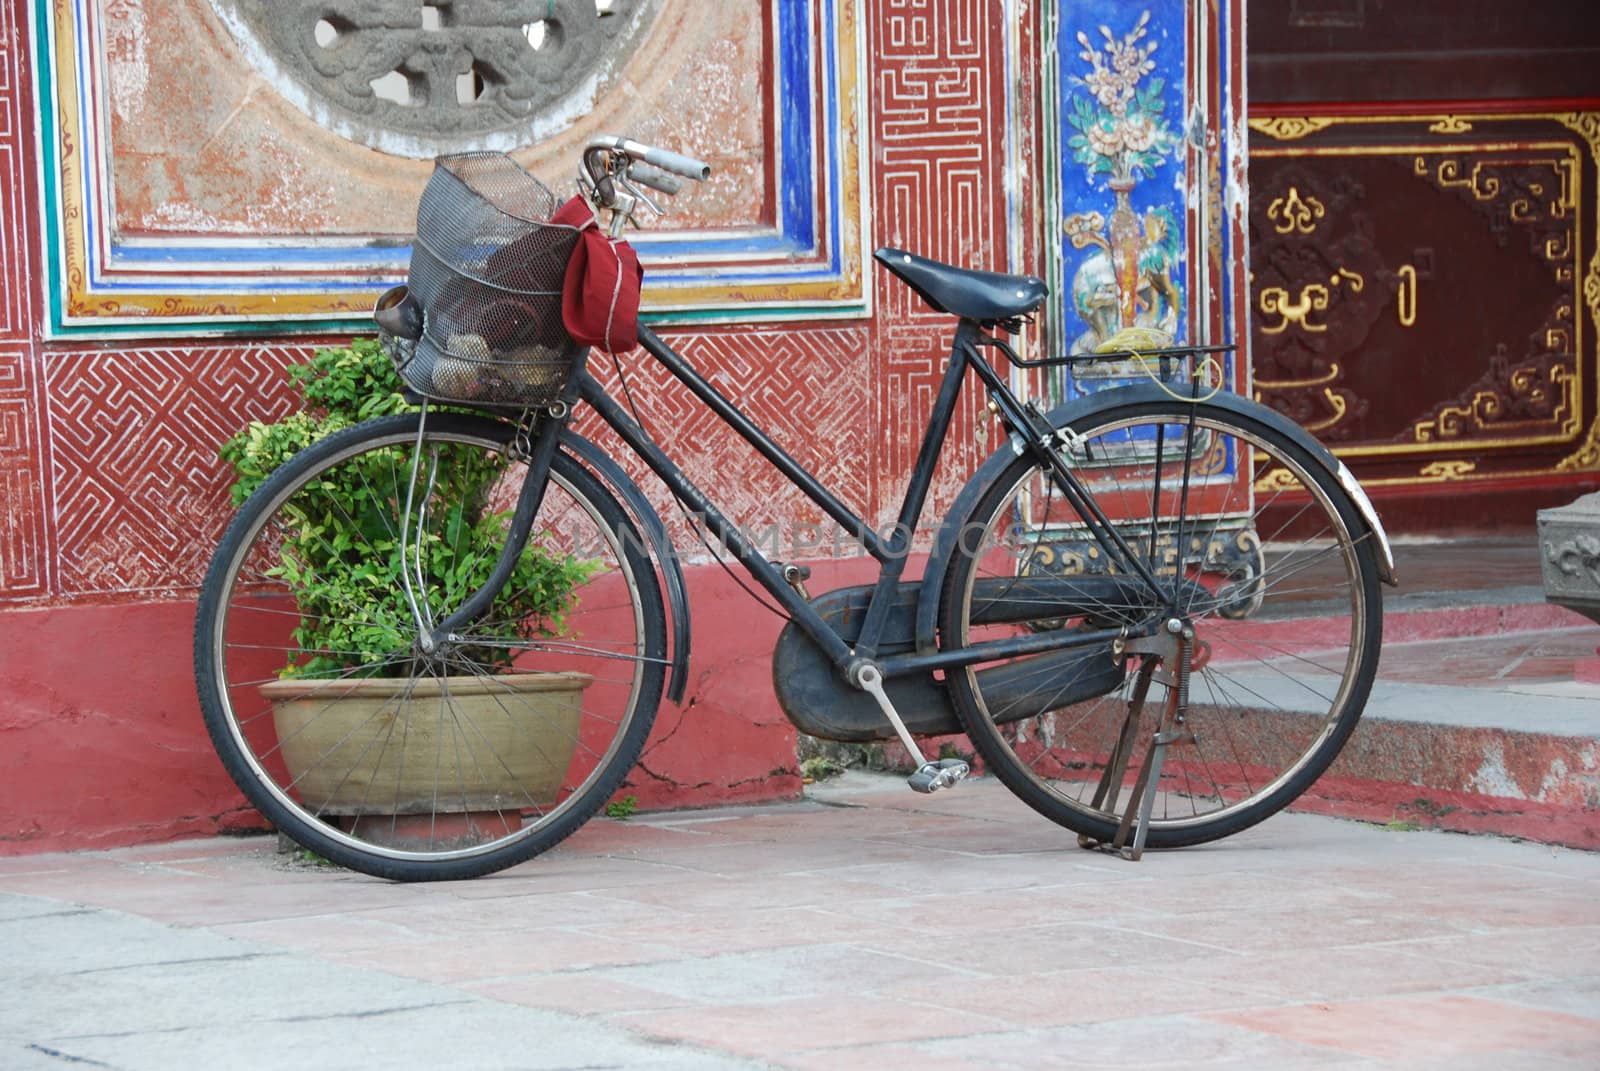 Bicycle at a Chinese temple